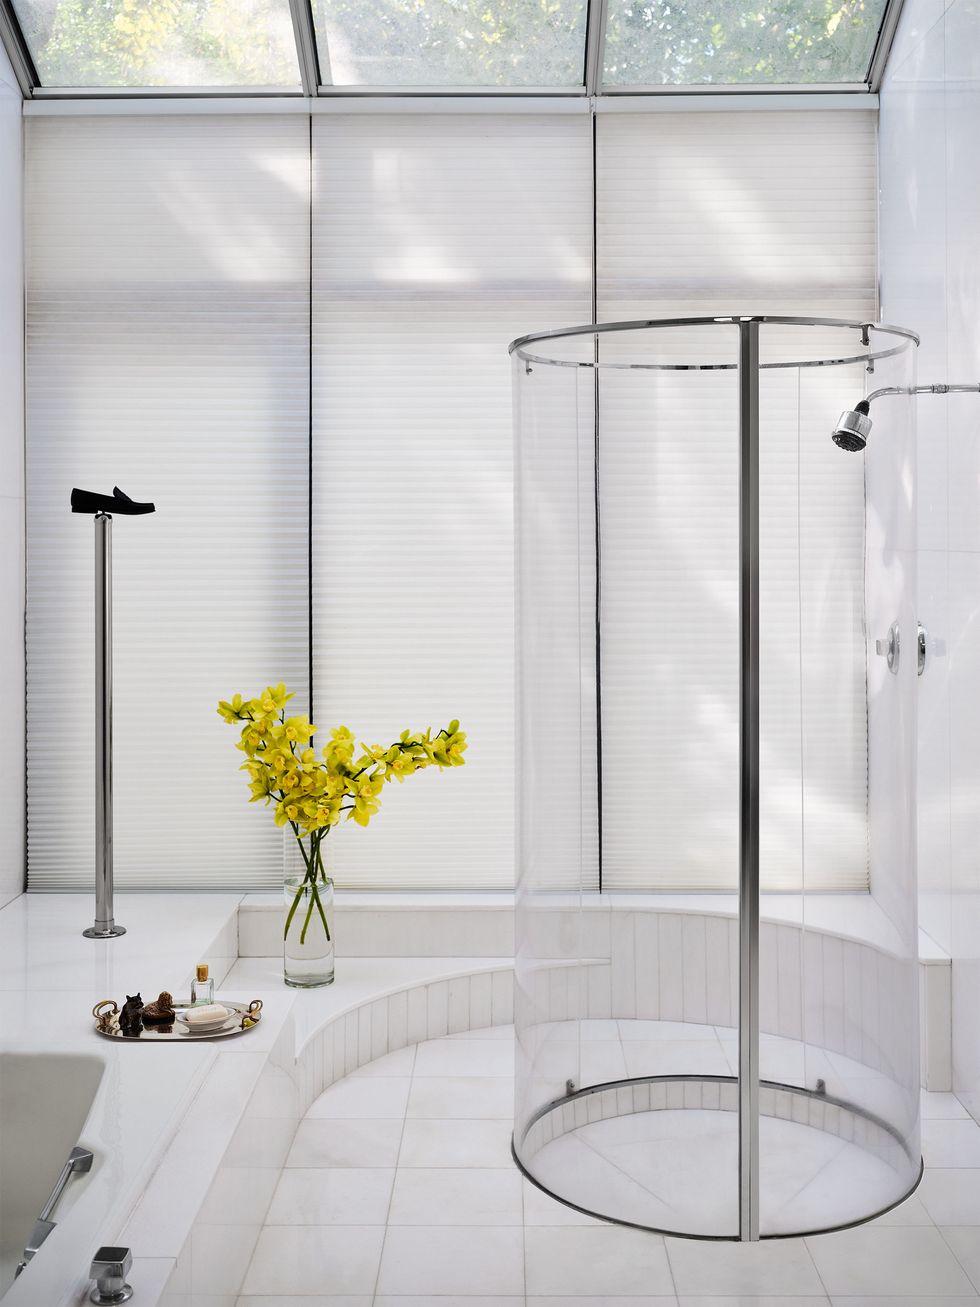 the floor of the primary bathroom is white marble and there is a jacuzzi and a cylindrical shower made of plexiglass, floor to ceiling windows have white honeycomb shades, ceiling windows are uncovered